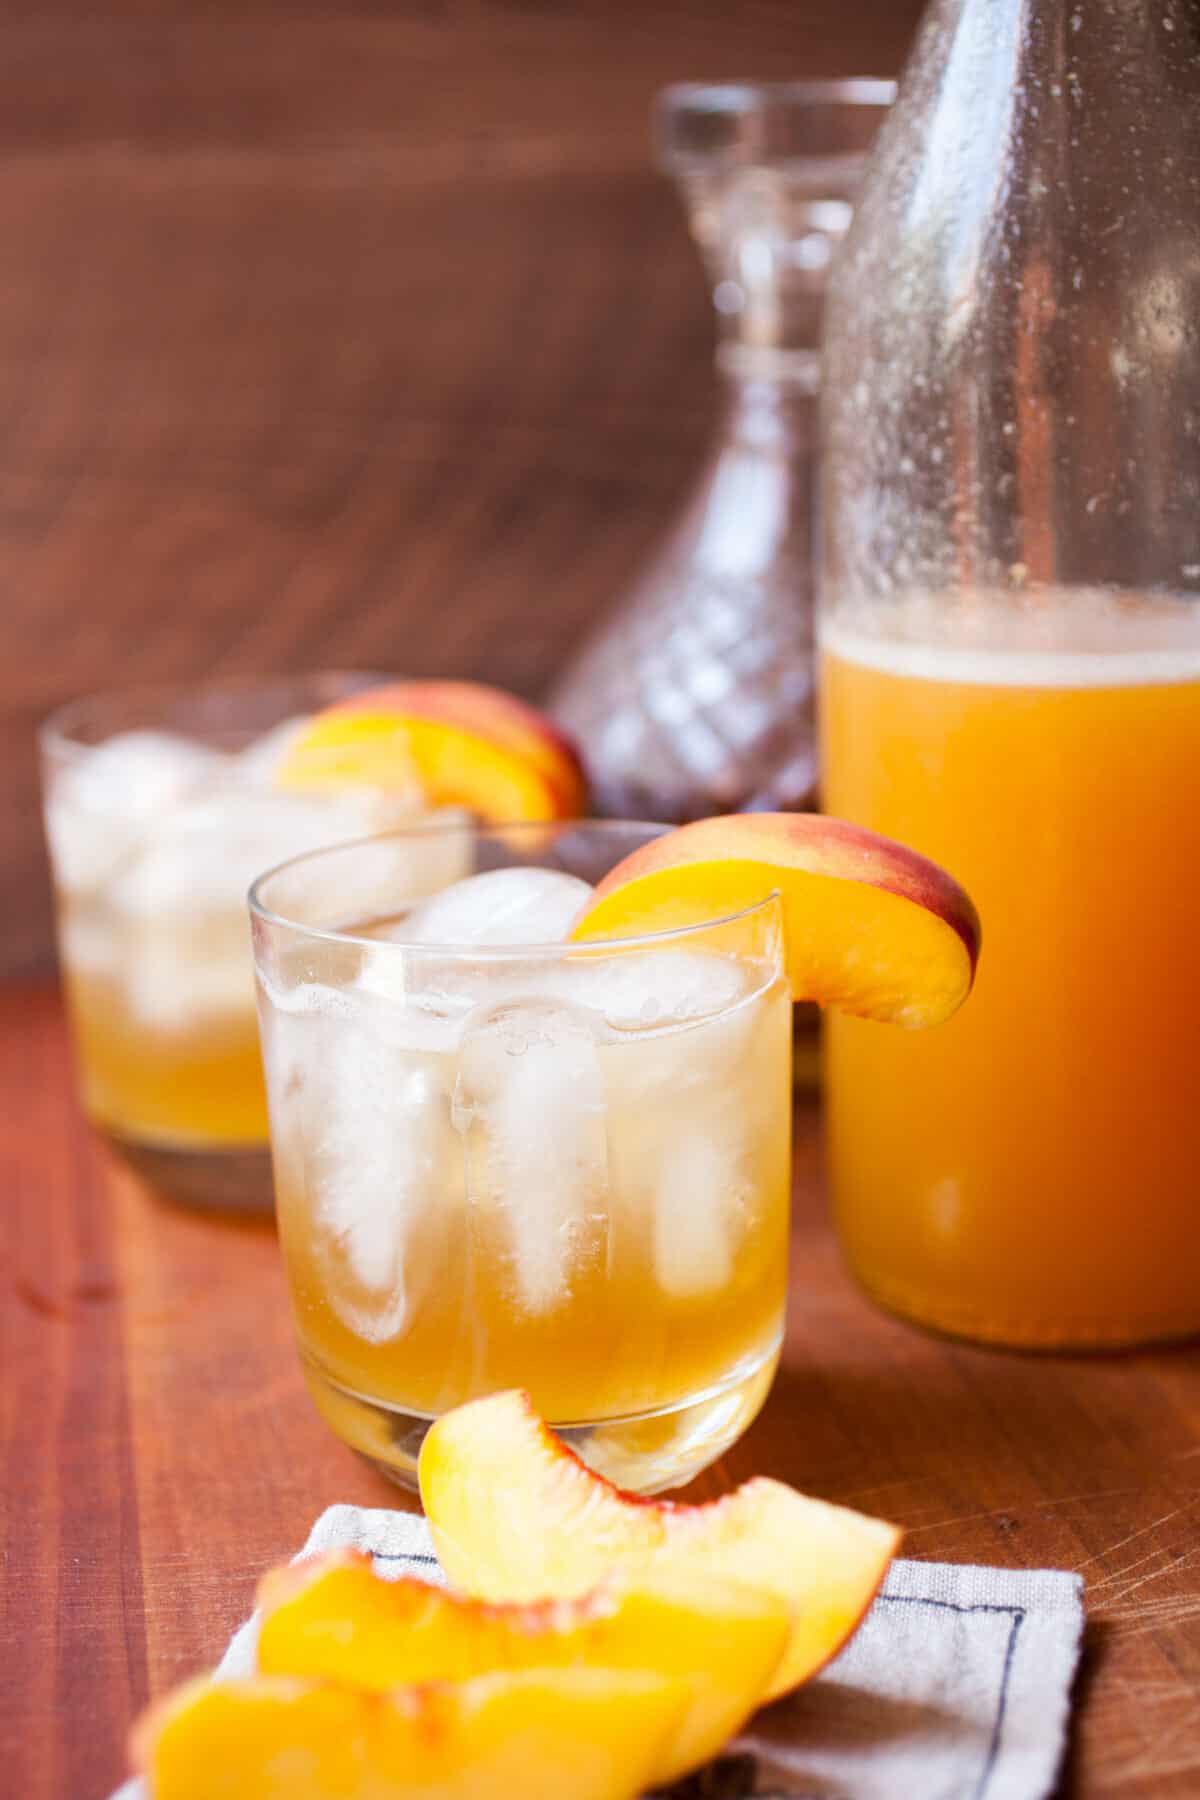 Easy Peach Cocktail Syrup: Just three ingredients (plus a pinch of salt) is all you need for this delicious seasonal cocktail syrup. I love it with a little gin or bourbon, but you can also make a delicious nonalcoholic beverage with club soda! Cheers! | macheesmo.com